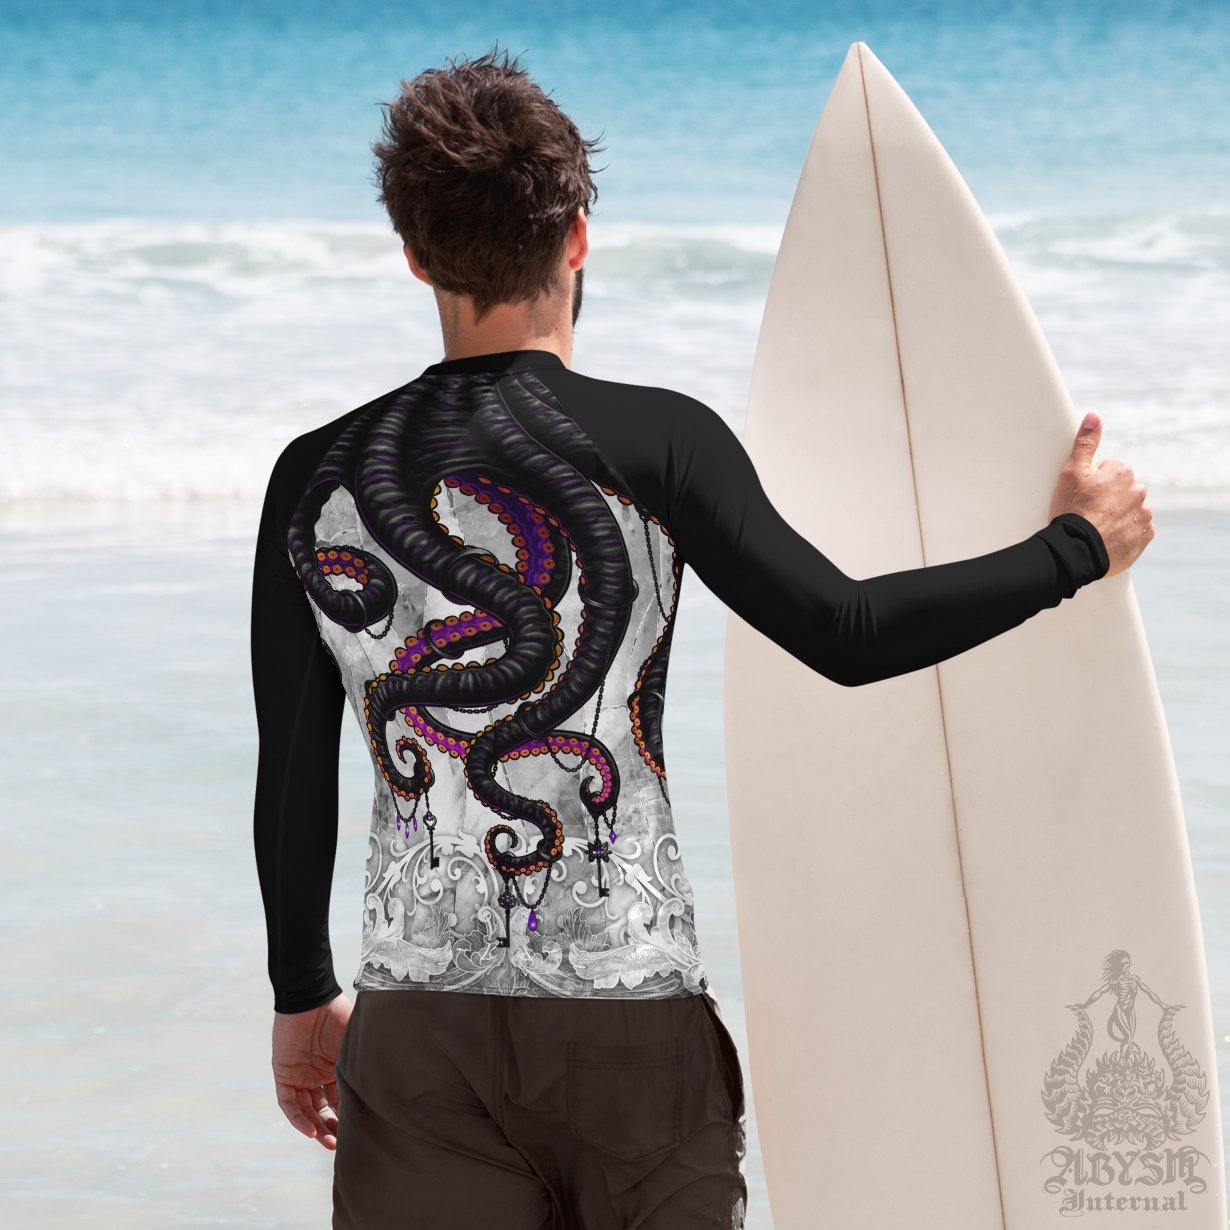 Octopus Rash Guard for Men, Long Sleeve spandex shirt for surfing, swimwear  top for water sports - Stone Black and White Goth